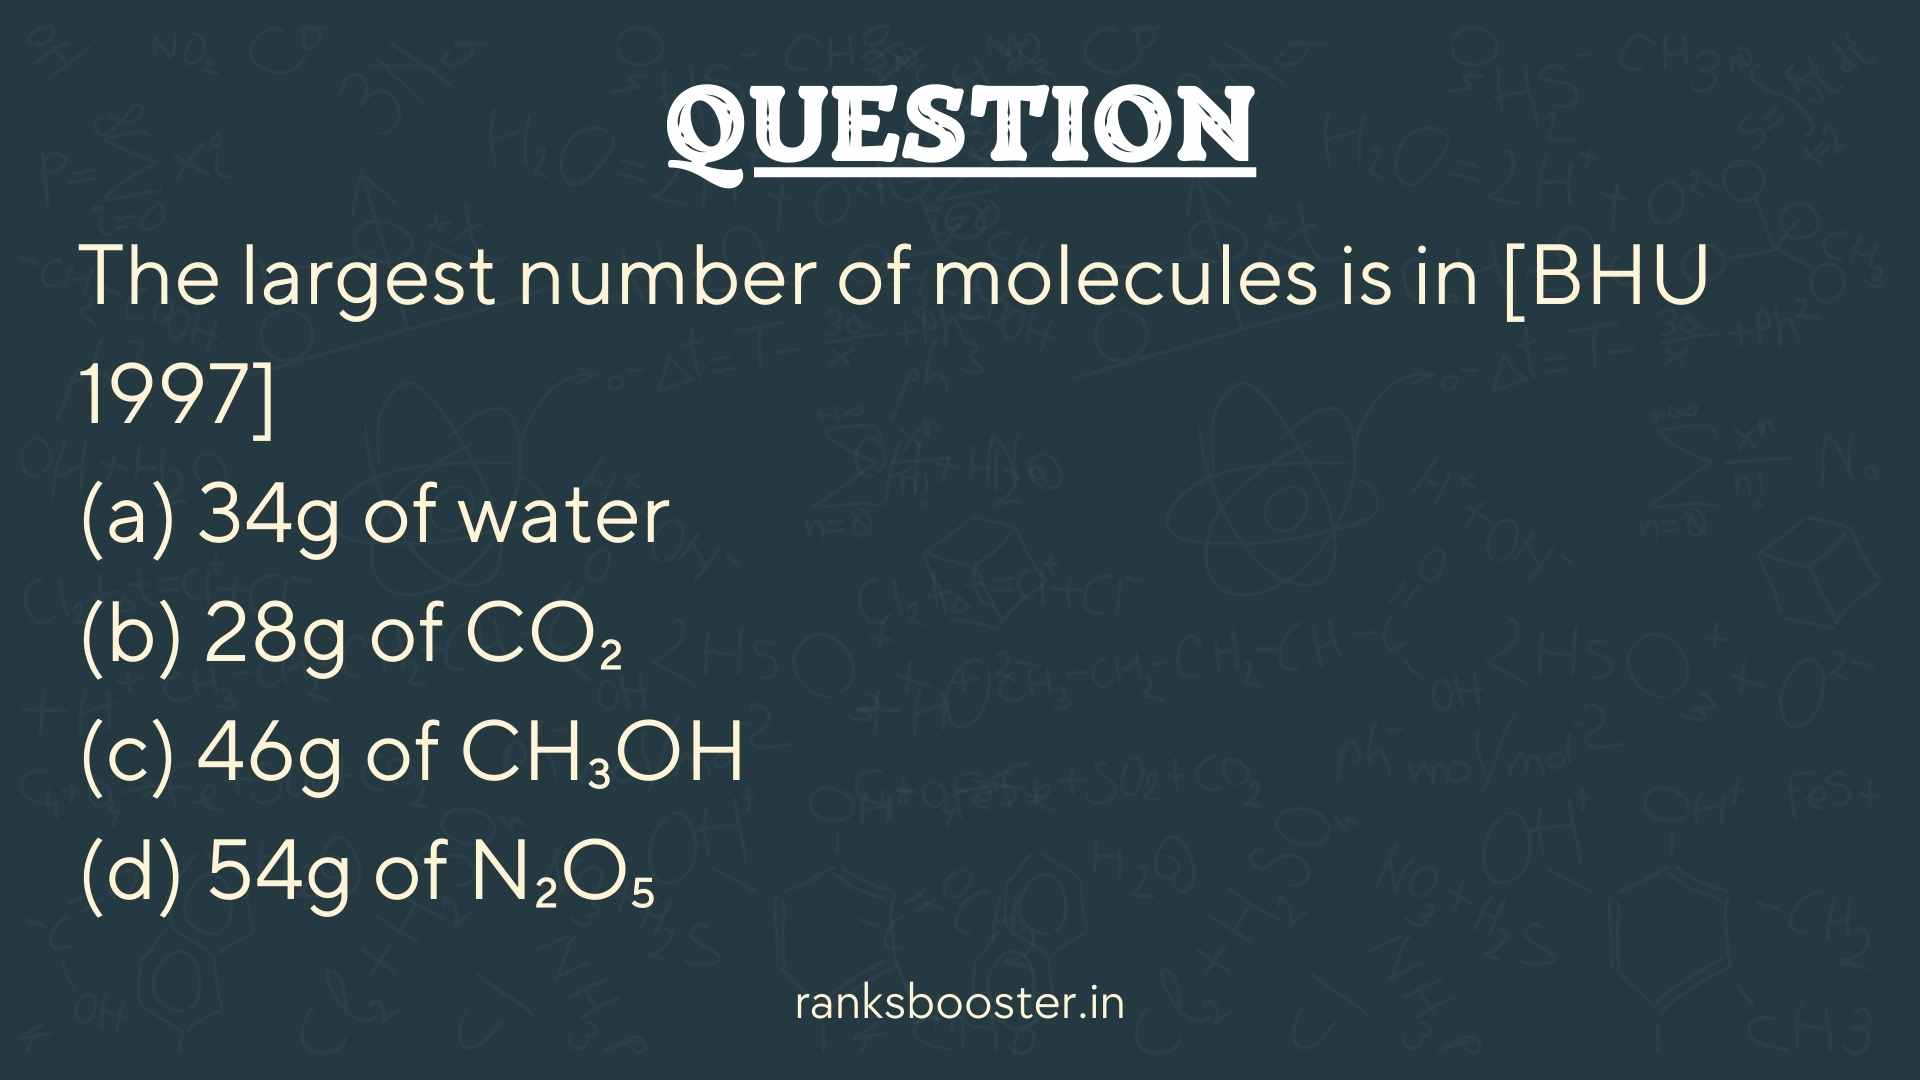 The largest number of molecules is in [BHU 1997] (a) 34g of water (b) 28g of CO₂ (c) 46g of CH₃OH (d) 54g of N₂O₅